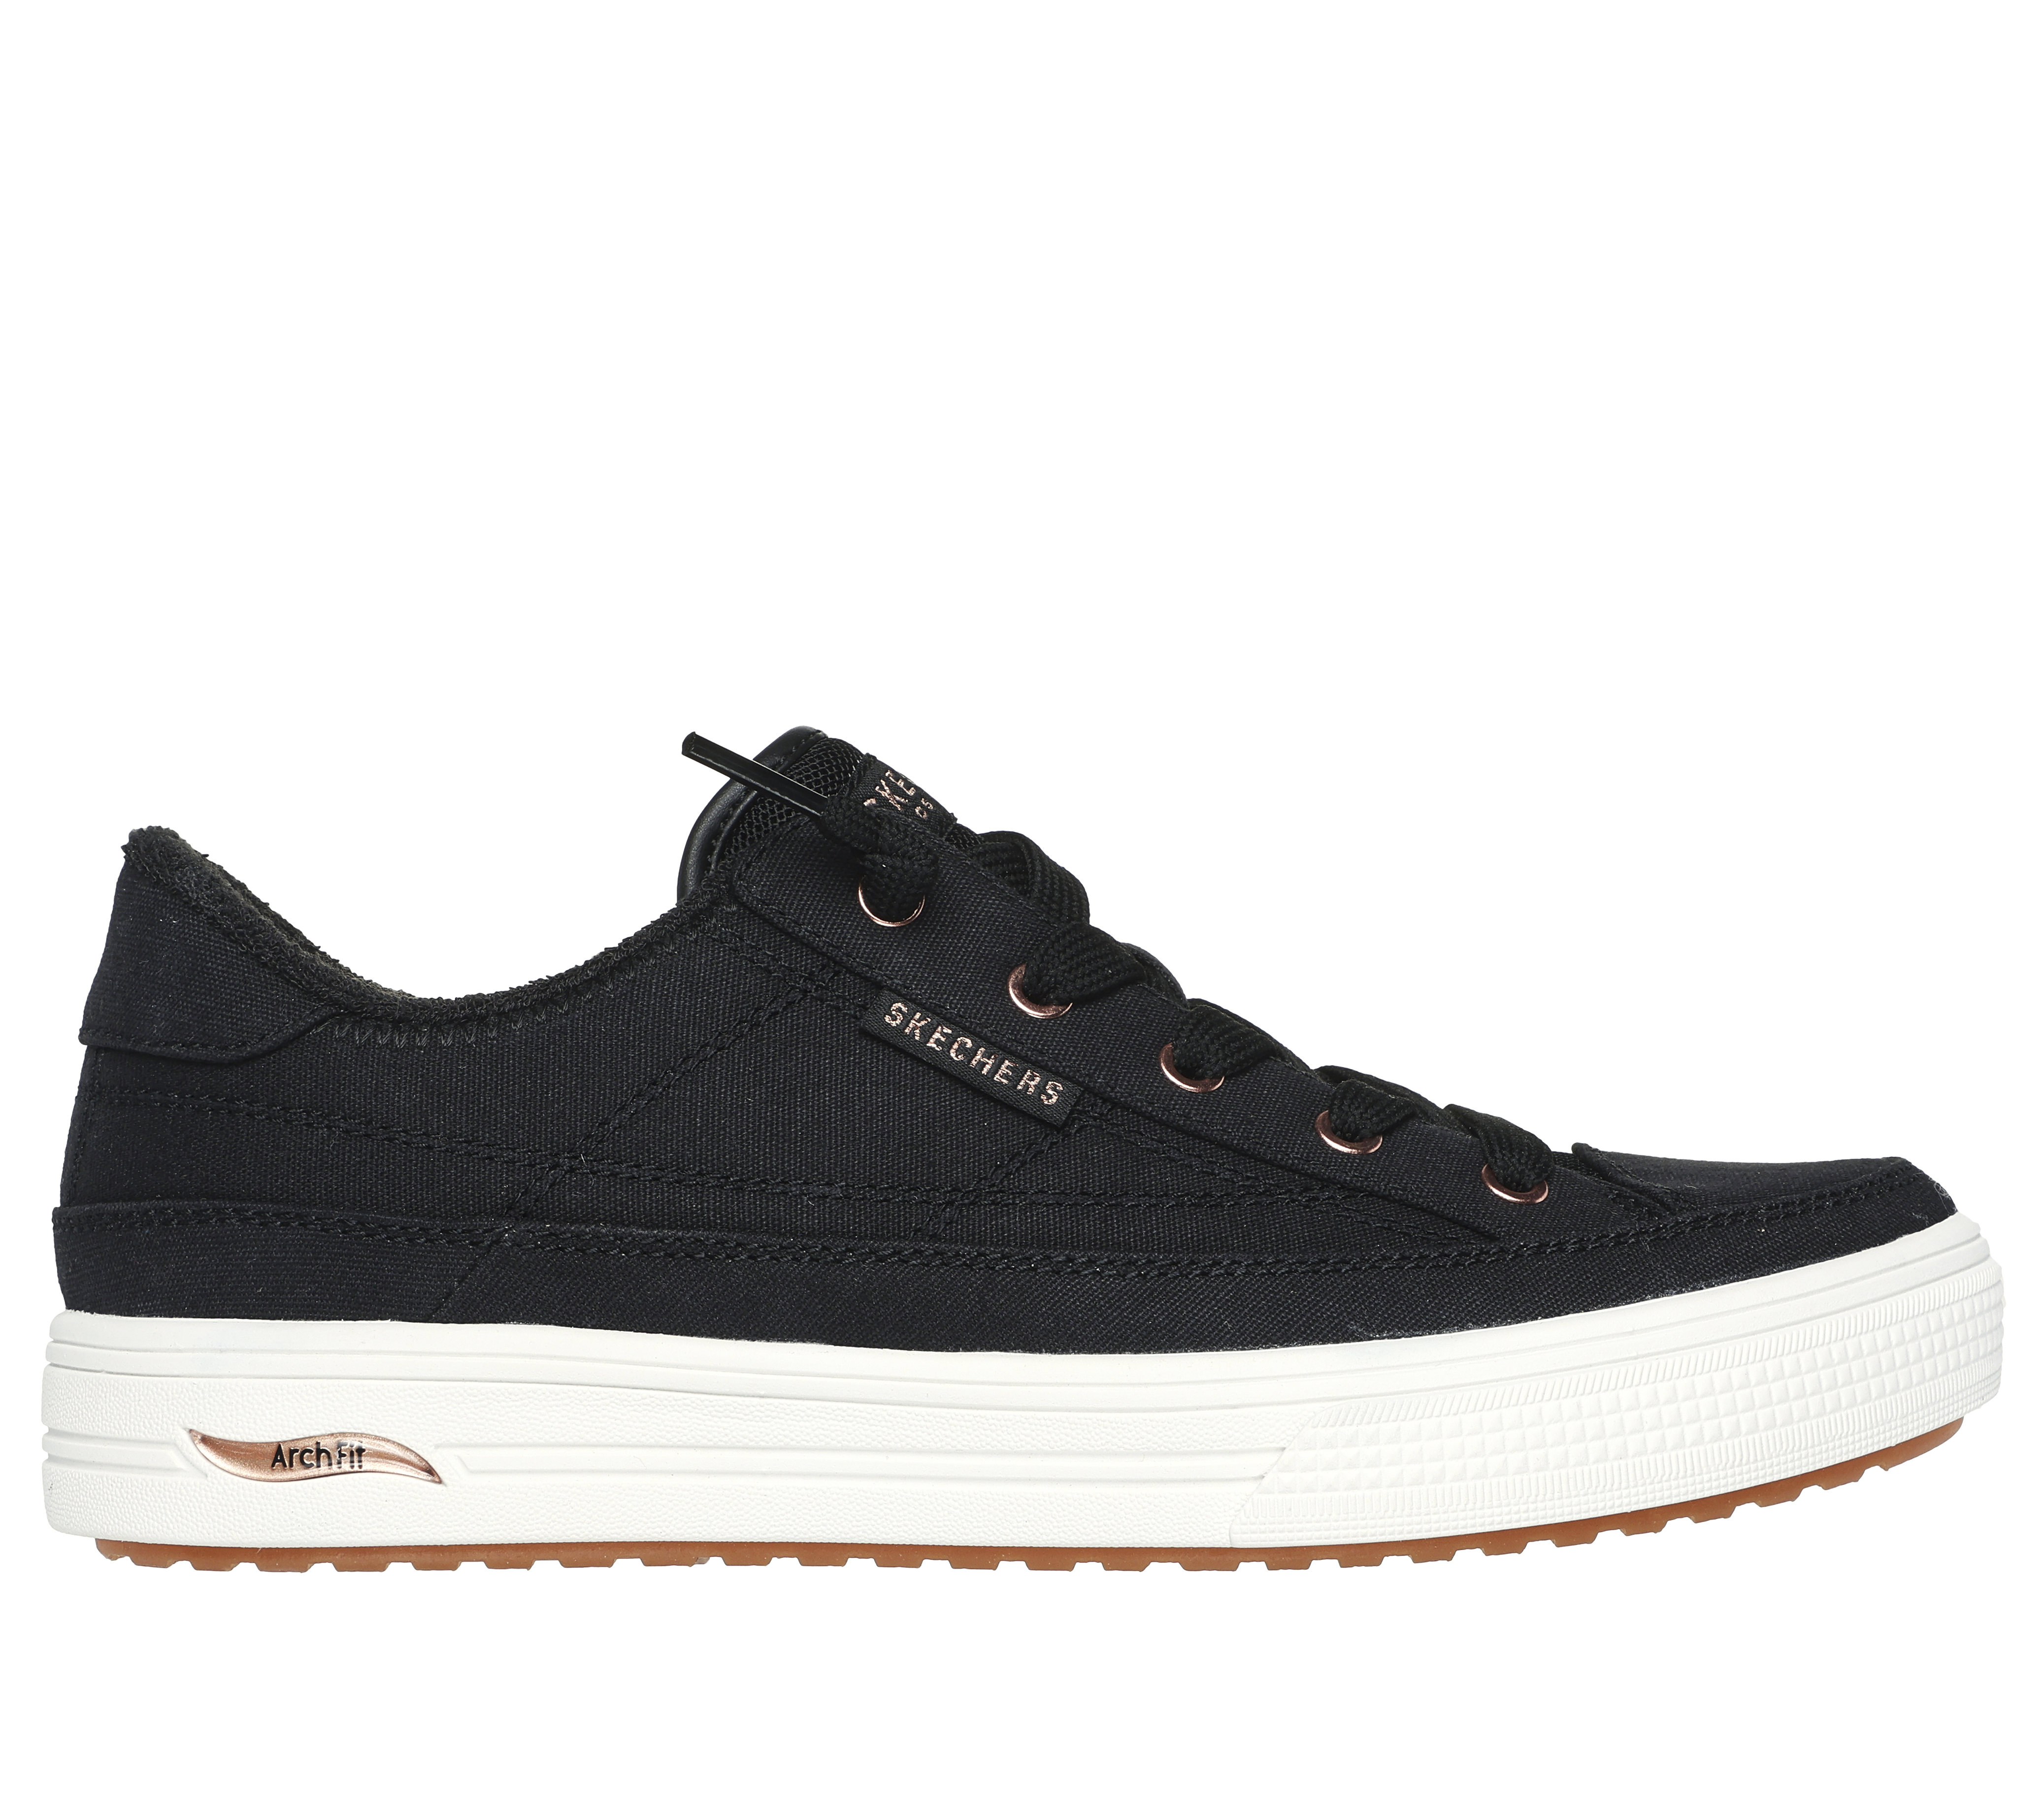 Descanso Absolutamente inquilino 桜の花びら(厚みあり) SKECHERS Skechers Women's Arch Fit Arcade-Meet Ya There Black  Canvas/Rose Gold Trim 6.5 M (6.5 US) - 通販 - www.flow-tech.ai